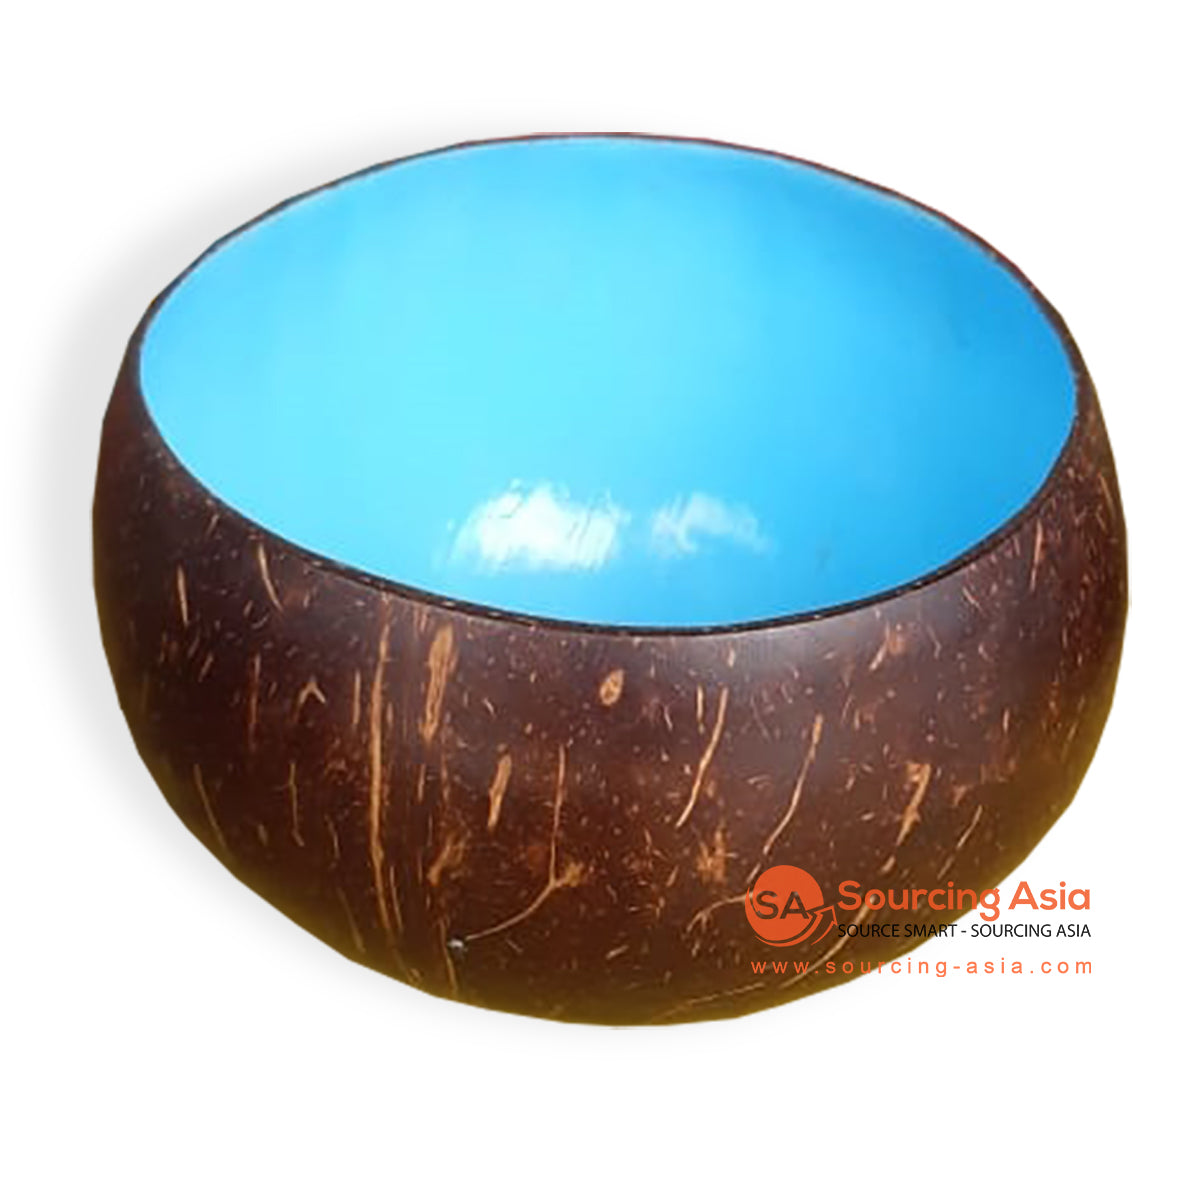 IDA002-1 NATURAL COCONUT BOWL WITH BLUE INSIDE